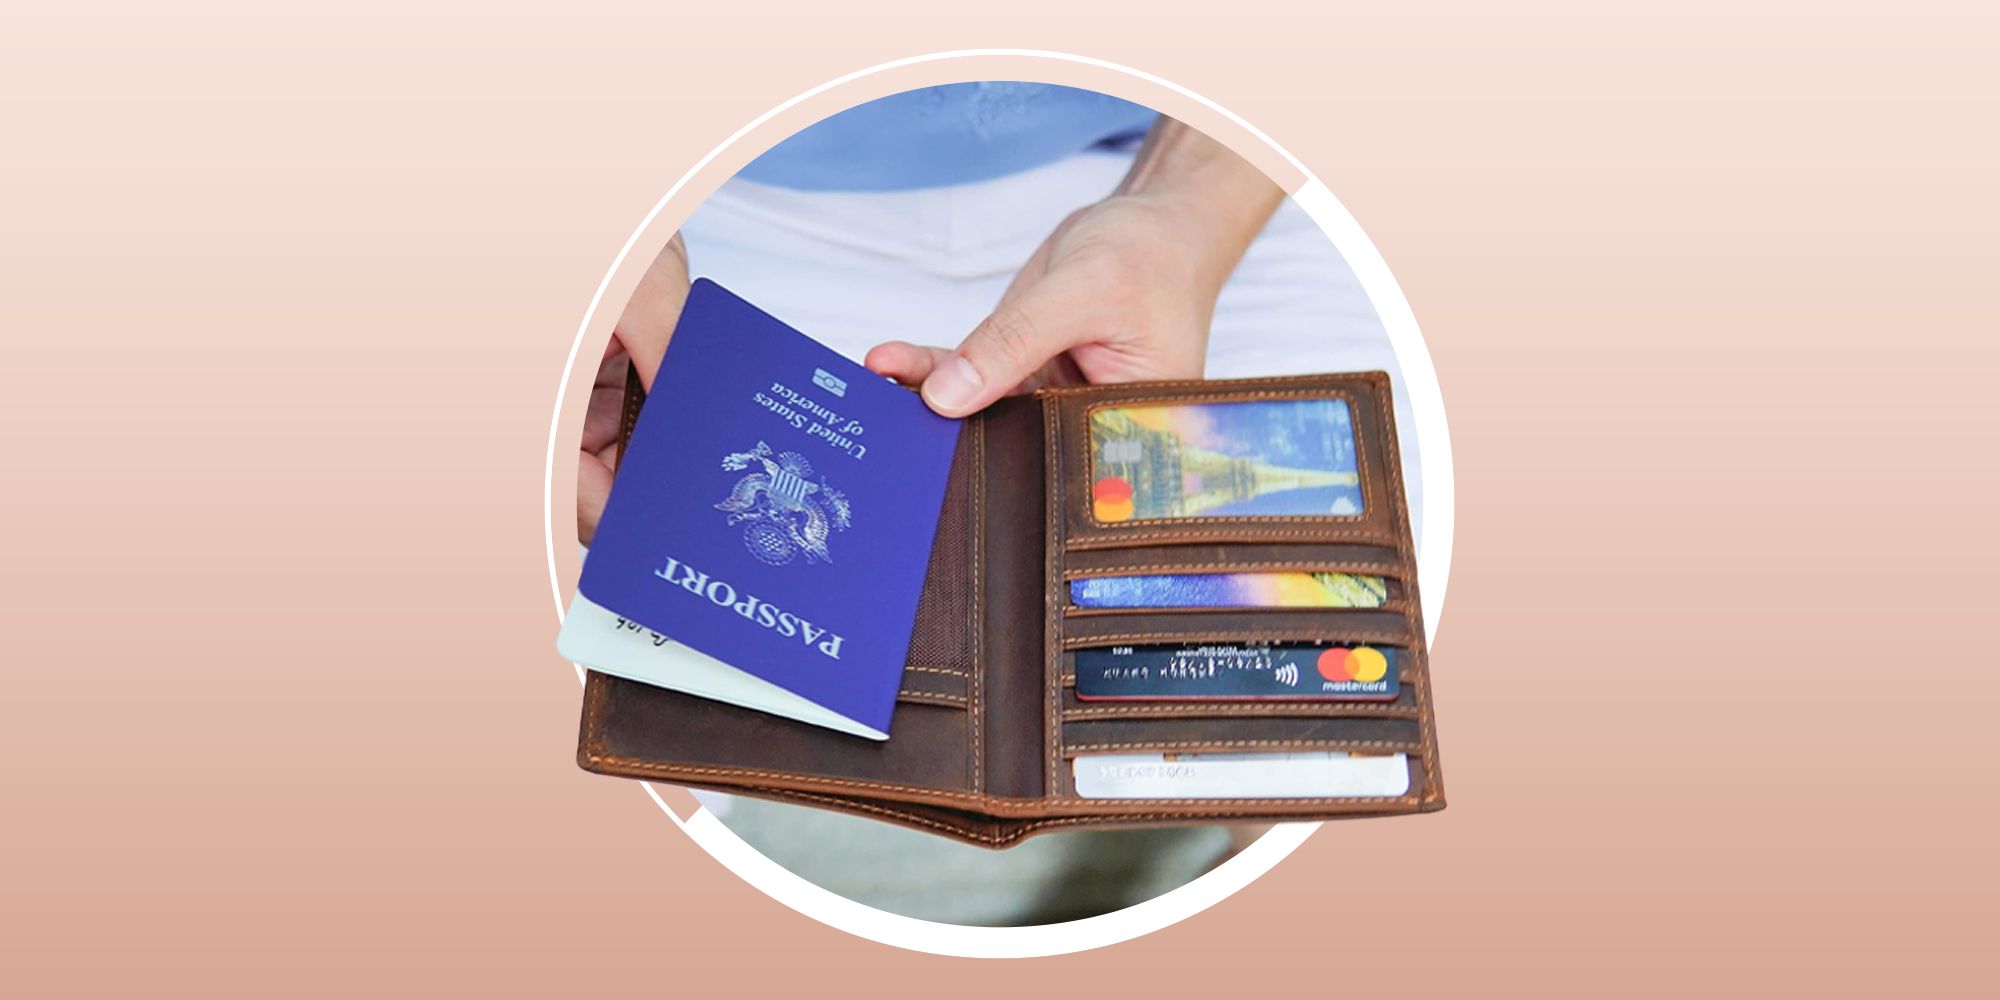 <p>When you’re <a href="https://www.bestproducts.com/lifestyle/a46179010/how-to-pack-a-suitcase/">traveling</a> abroad or buying a gift for someone who is, the last thing you or they want to worry about is a lost passport. You can try some different tricks, like taping an <a href="https://www.bestproducts.com/tech/a46769670/where-put-airtag-in-luggage/">AirTag</a> to it (we don’t recommend this route), or you could get an expert-crafted wallet designed to keep this essential, along with your currencies, all in one spot. The best Passport wallets out there have handy slots and compartments for everything you need — credit cards, IDs, cash, change, you name it — but there are <em>a lot </em>of different wallets out there, and choosing one can feel tricky.</p><p>From luxe waterproof shells to simple under-$20 designs, we tapped into experts, picky Reddit users, travel influencers, and real reviewers to find the best Passport wallets out there. Here’s what we found:</p><h2 class="body-h2">Best Passport Wallets</h2><ul><li><strong>Best Overall:</strong> <a href="https://www.amazon.com/dp/B09BCM2XSF?th=1&tag=syndication-20&ascsubtag=%5Bartid%7C2089.g.46988800%5Bsrc%7Cmsn-us">Melsbrinna Passport Holder</a></li><li><strong>Best Budget: </strong><a href="https://www.amazon.com/ZOPPEN-Wallet-Travel-Essentials-Organizer/dp/B01ABE70RA/?tag=syndication-20&ascsubtag=%5Bartid%7C2089.g.46988800%5Bsrc%7Cmsn-us">ZOPPEN Passport Wallet</a></li><li><strong>Best Luxury: </strong><a href="https://go.redirectingat.com?id=74968X1553576&url=https%3A%2F%2Fpioneercarry.com%2Fcollections%2Fwallets%2Fproducts%2Faltitude-billfold&sref=https%3A%2F%2Fwww.bestproducts.com%2Flifestyle%2Fg46988800%2Fpassport-wallet%2F">Altitude Billfold</a></li><li><strong>Best Features: </strong><a href="https://www.amazon.com/dp/B09W5J2LR2?th=1&tag=syndication-20&ascsubtag=%5Bartid%7C2089.g.46988800%5Bsrc%7Cmsn-us">Baphity Genuine Leather Passport Holder </a></li><li><strong>Best for Families: </strong><a href="https://www.amazon.com/dp/B01LPTAIJM?th=1&tag=syndication-20&ascsubtag=%5Bartid%7C2089.g.46988800%5Bsrc%7Cmsn-us">Zoppen Passport Holder </a></li></ul><h2 class="body-h2">What to Consider</h2><p><a href="https://www.instagram.com/wlsgrace/">Travel writer and expert</a> Grace Smith recommends that travelers look for leaflets or covers with multiple organizers. “As someone who nearly always has the intrusive ‘Where is my passport?’ panic in the customs line, I prioritize having one both easy to spot in a crowded bag with location features like <a href="https://www.bestproducts.com/tech/gadgets/g37625424/best-airtag-wallets/">AirTag compatibility</a> as a bonus,” she explained. </p><h3 class="body-h3">Space Needed</h3><p>Do you want a zipper enclosure? How about slots for paper currency or coins? What about a pouch for SIM cards and a place to put paper tickets? Consider <em>everything </em>you might want in your passport wallet, then start your search. We’ve found that many travelers like waterproof wallets to ensure that, no matter the weather they might experience, their passports will remain in pristine condition. </p><h3 class="body-h3">Safety Features</h3><p>Some wallets have safety features that can help prevent theft, such as zippers. Others have RFID-blocking capabilities, which means they prevent others using portable card readers from getting your credit or debit card information. This comes in handy in places where you can use touch payment methods or in areas known for criminal activity, like public transportation or tourist-heavy destinations. If you’re comfortable with button-up closures, there are plenty of those, too.</p><h3 class="body-h3">Budget</h3><p>Like typical wallets, passport wallets range in price depending on what they’re made from and what they offer. A lot of stellar Amazon choices ring in for under $40, but if you want something high-end and high-tech, you’ll be looking at styles closer to $100. Consider how much you’re willing to spend while considering the features listed above. It’s likely that the more features you want, the more expensive the wallet will be.</p><h3 class="body-h3">Usage</h3><p class="body-text">How long and how often are you intending to use your passport wallet? If it’s a few weeks every few years, you could get away with material like nylon. If you’re going to be using it multiple times throughout the year for pretty much the rest of your life, look into durable options like leather. </p><h2 class="body-h2">How We Selected</h2><p>We took into consideration everything from price to the materials from which these passport wallets are made. We also consulted travel experts, influencers, and picky online reviewers from Reddit and TikTok to find the best versions available. We compared wallets based on their features, looks, durability, waterproof capabilities, RFID-blocking efficiency, and dimensions to come up with our definitive list that helps travelers not only keep their documents organized on the go but also not compromise functionality for style. </p>